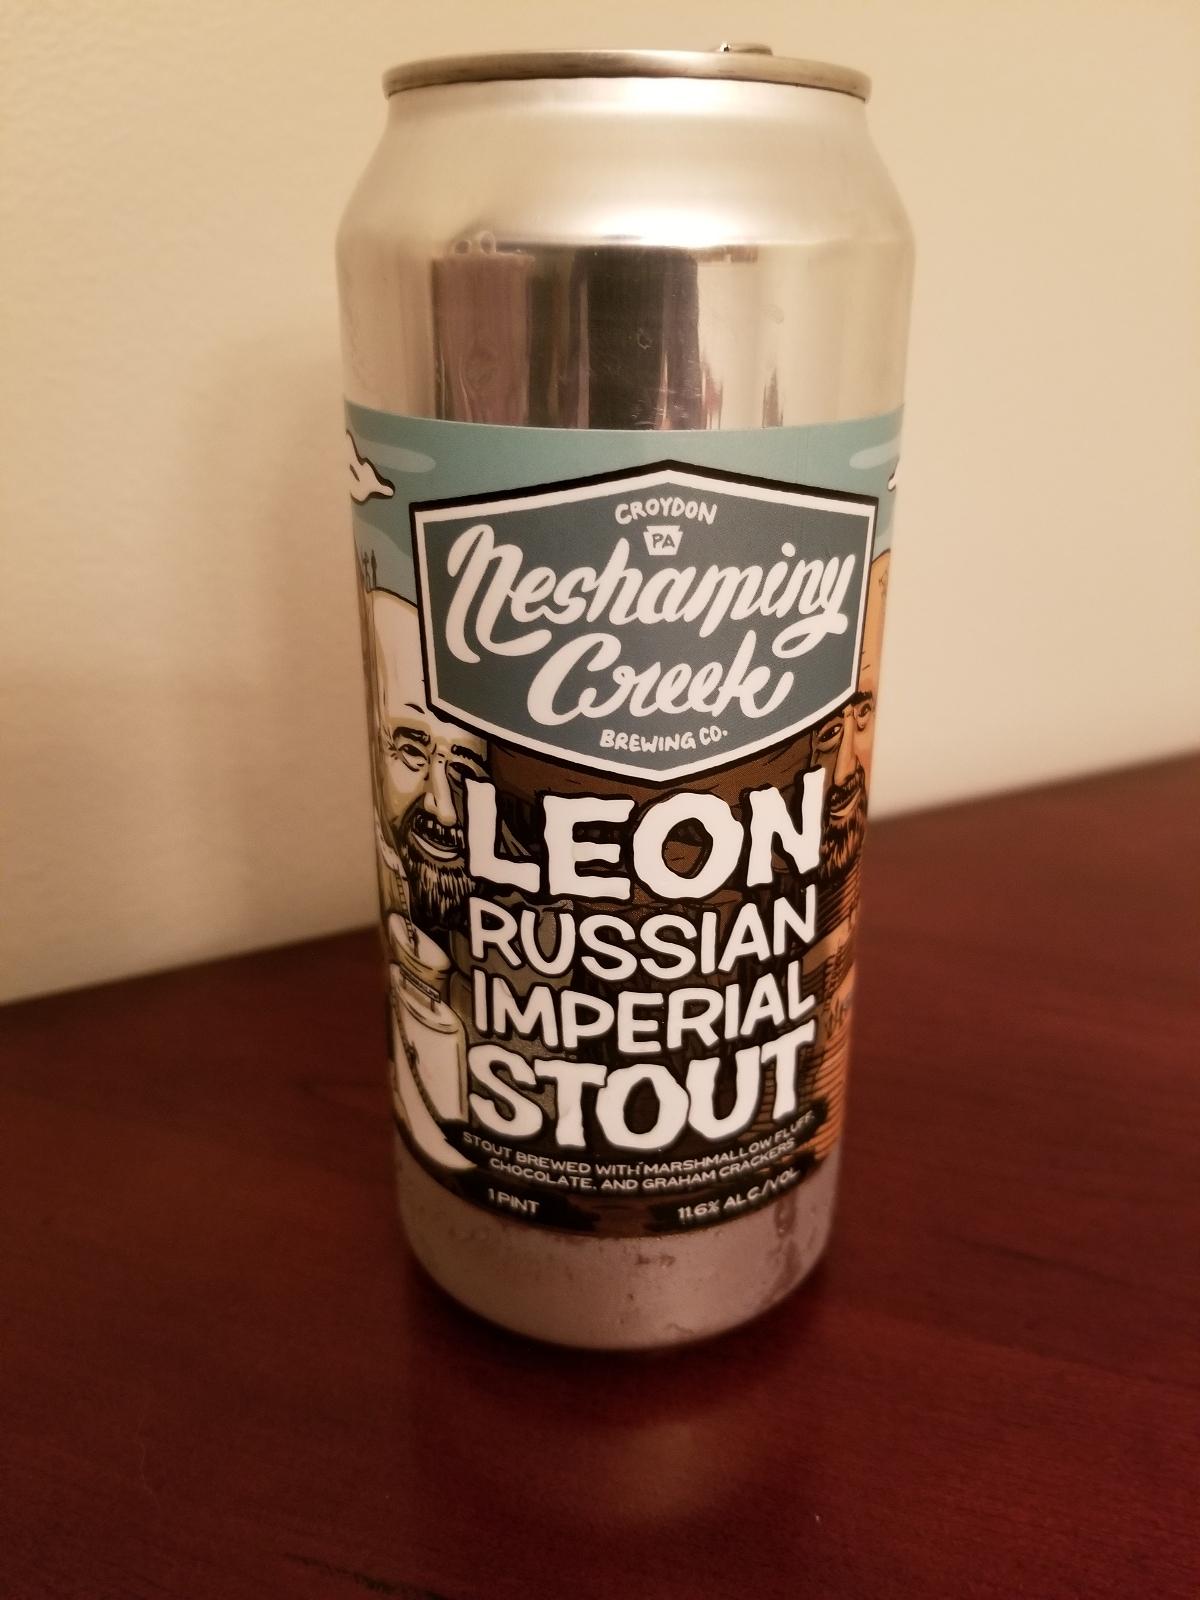 Leon Russian Imperial Stout